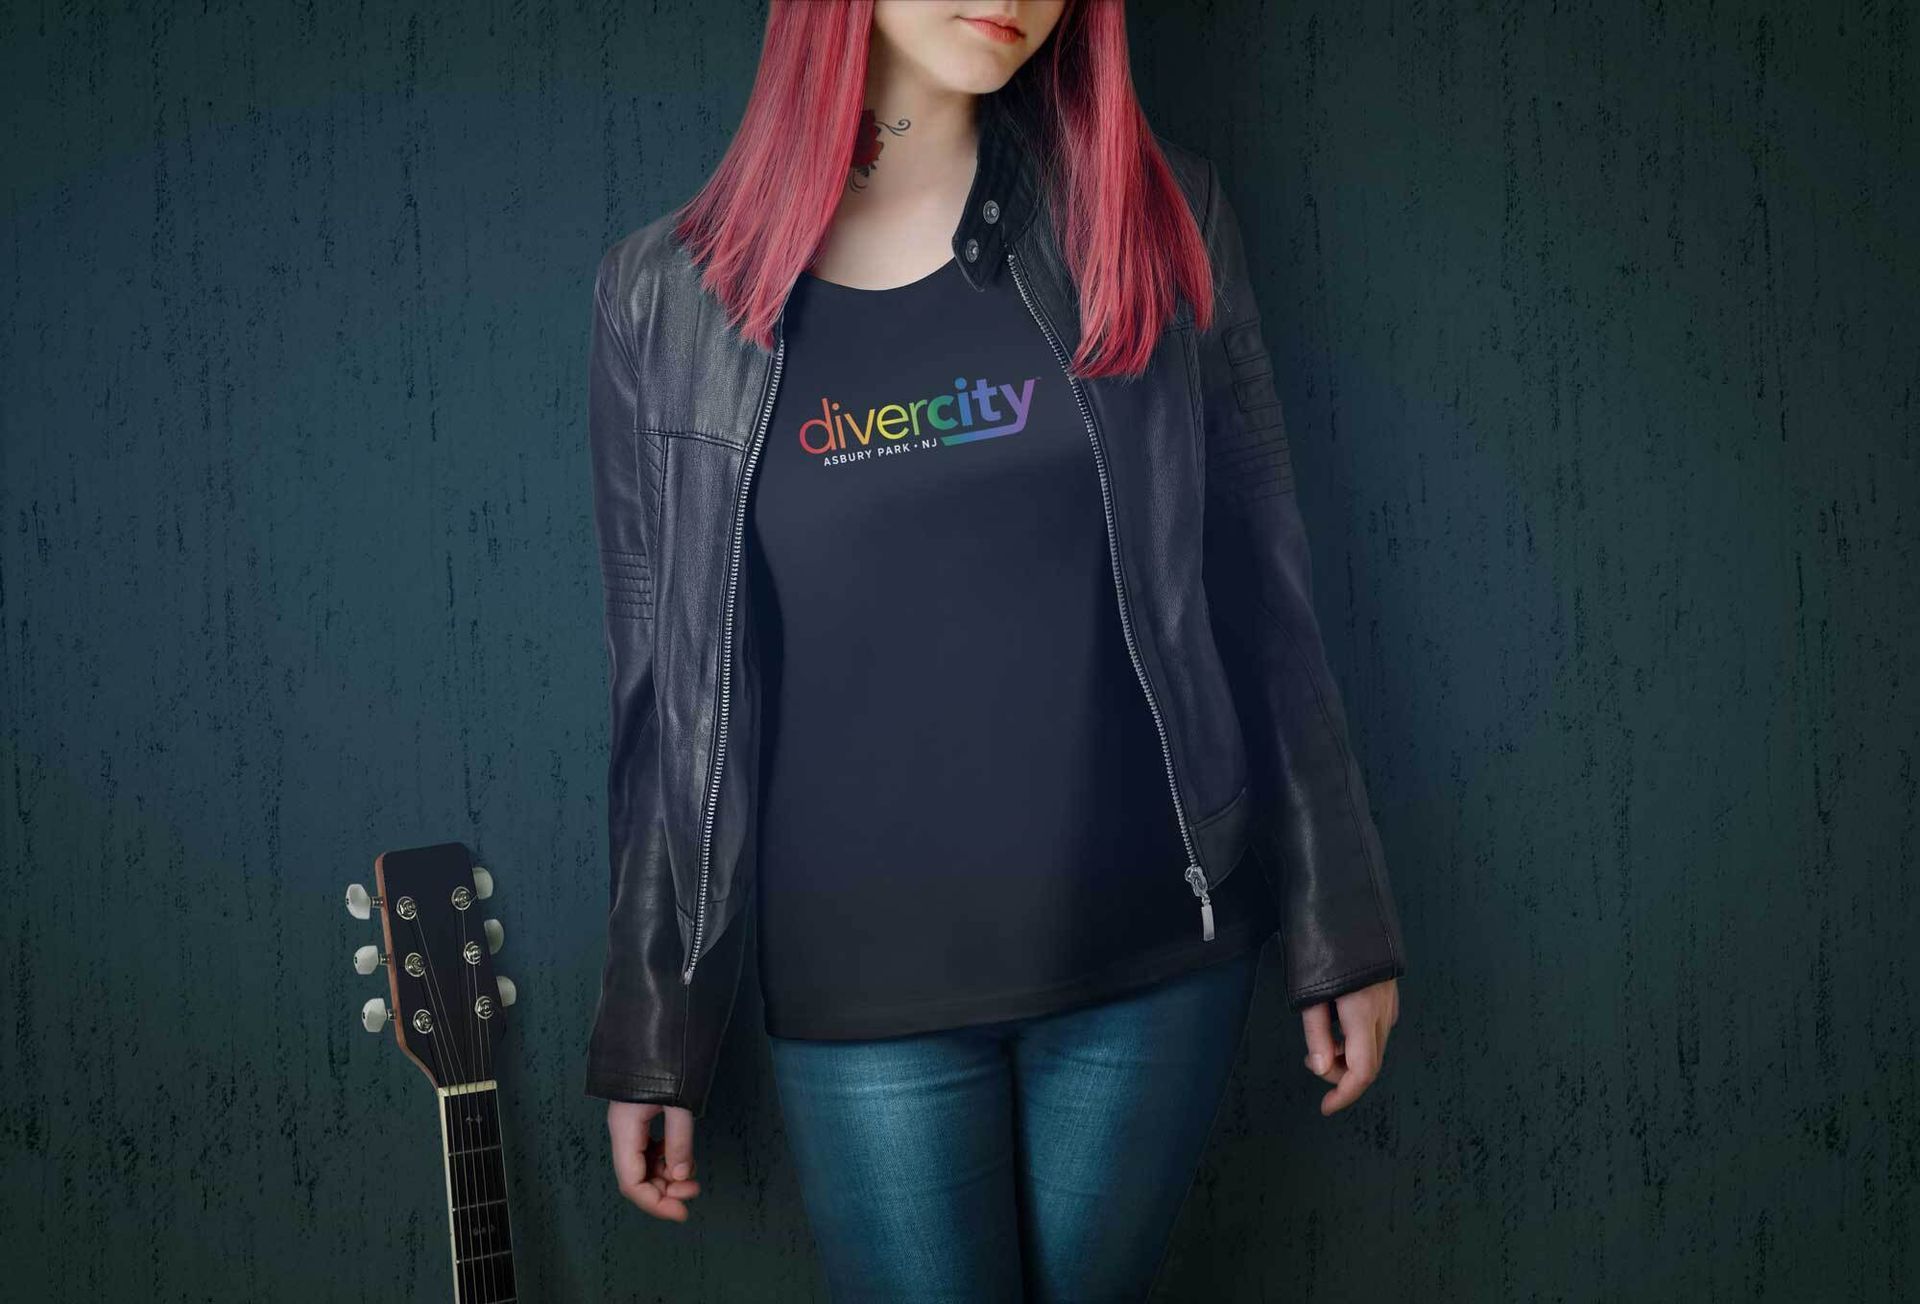 Girl in black leather jacket, long red hair and guitar alongside wearing rainbow divercity Tty logo